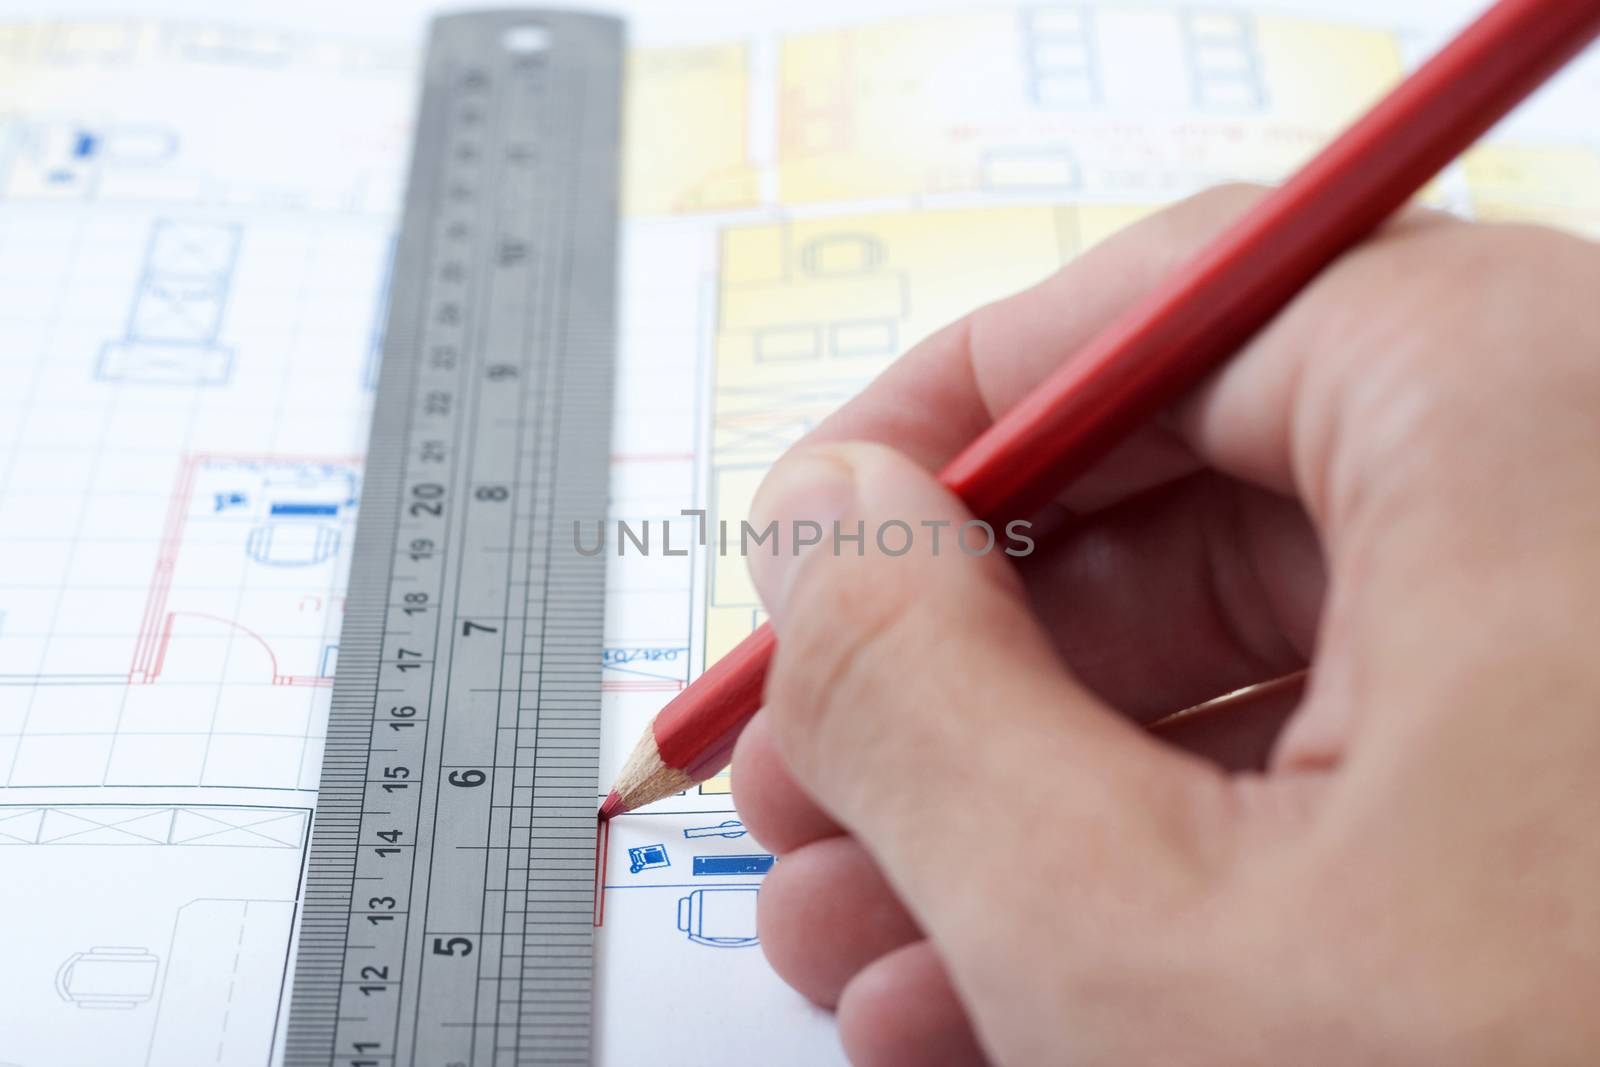 drawing a house plan with pencil and ruler